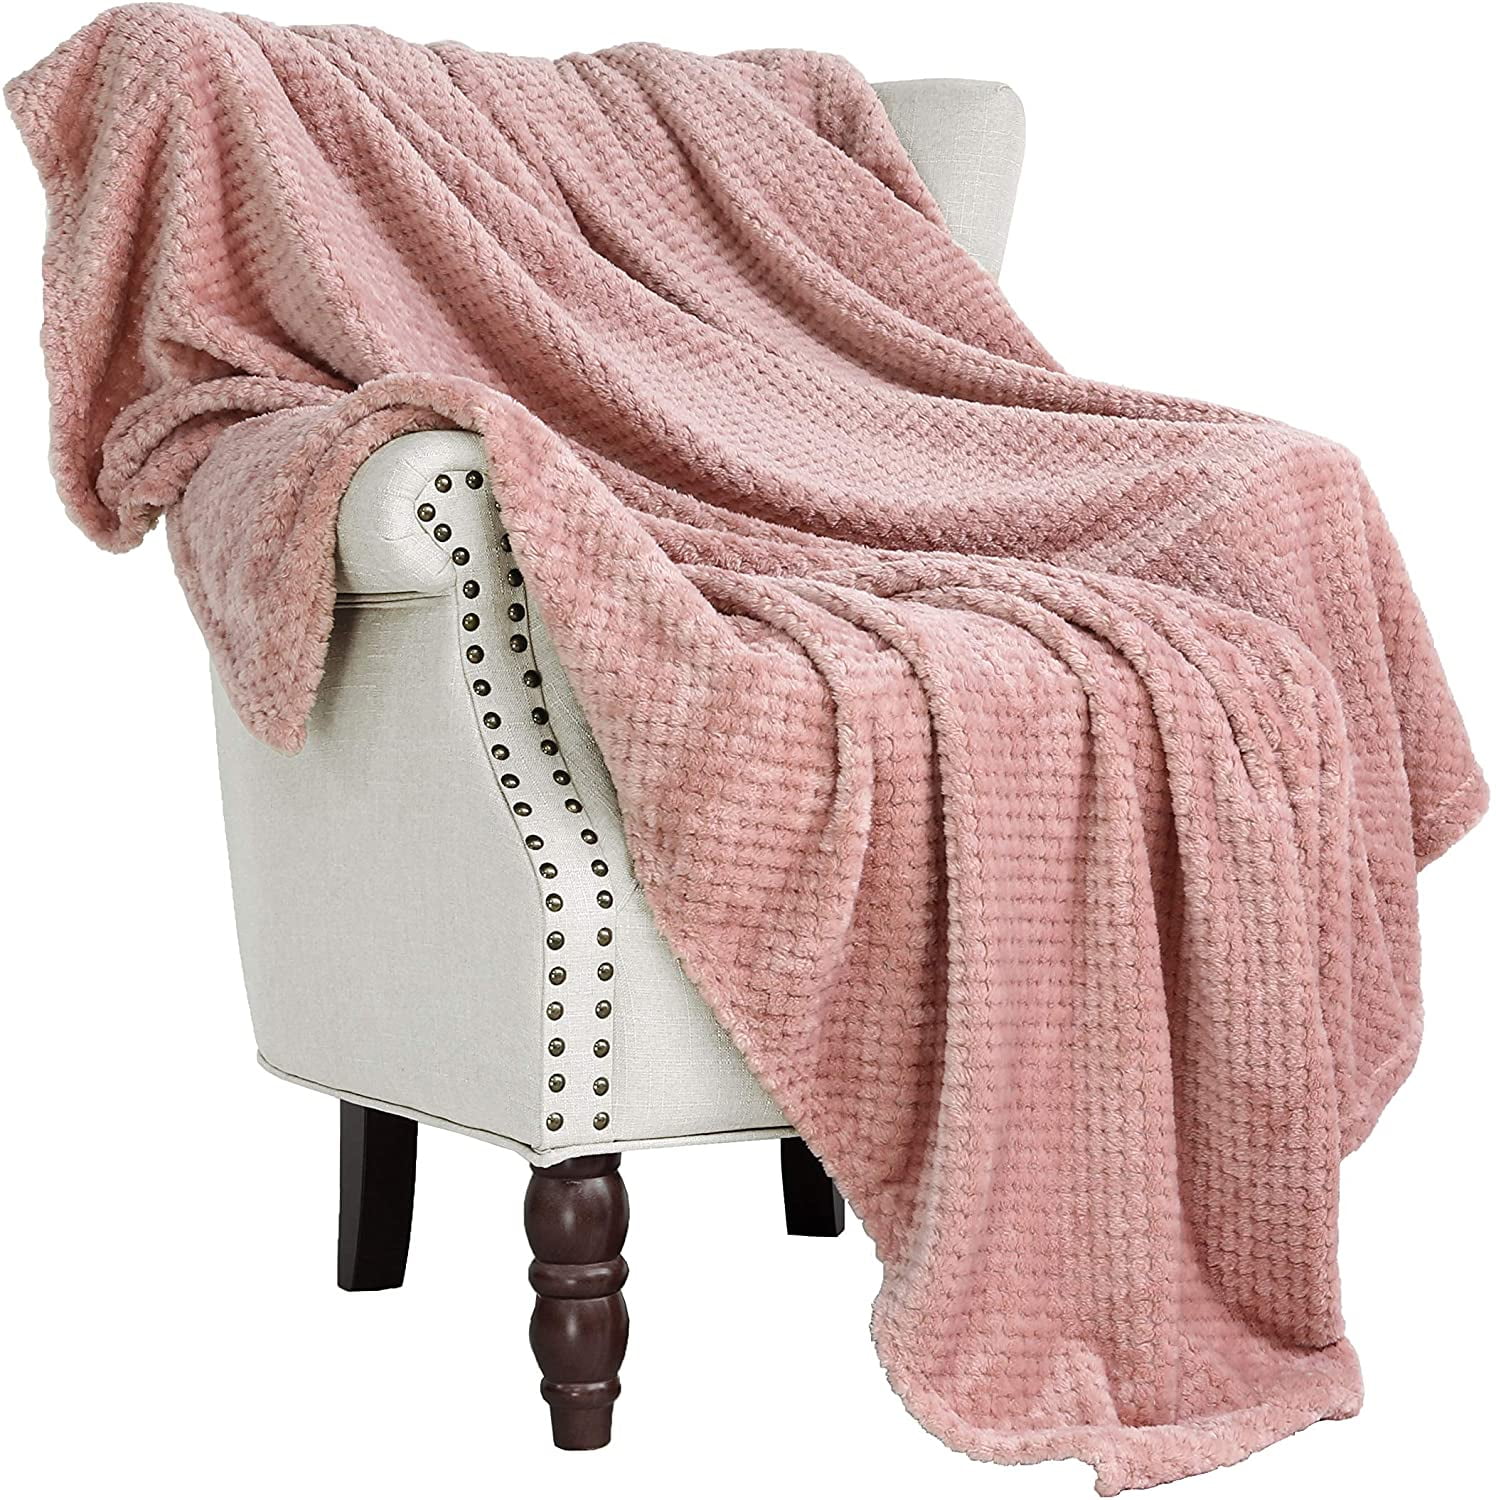 Exclusivo Mezcla Waffle Textured Soft Fleece Blanket, Large Throw  Blanket(Dusty Pink, 50 x 70 inches)- Cozy, Warm and Lightweight